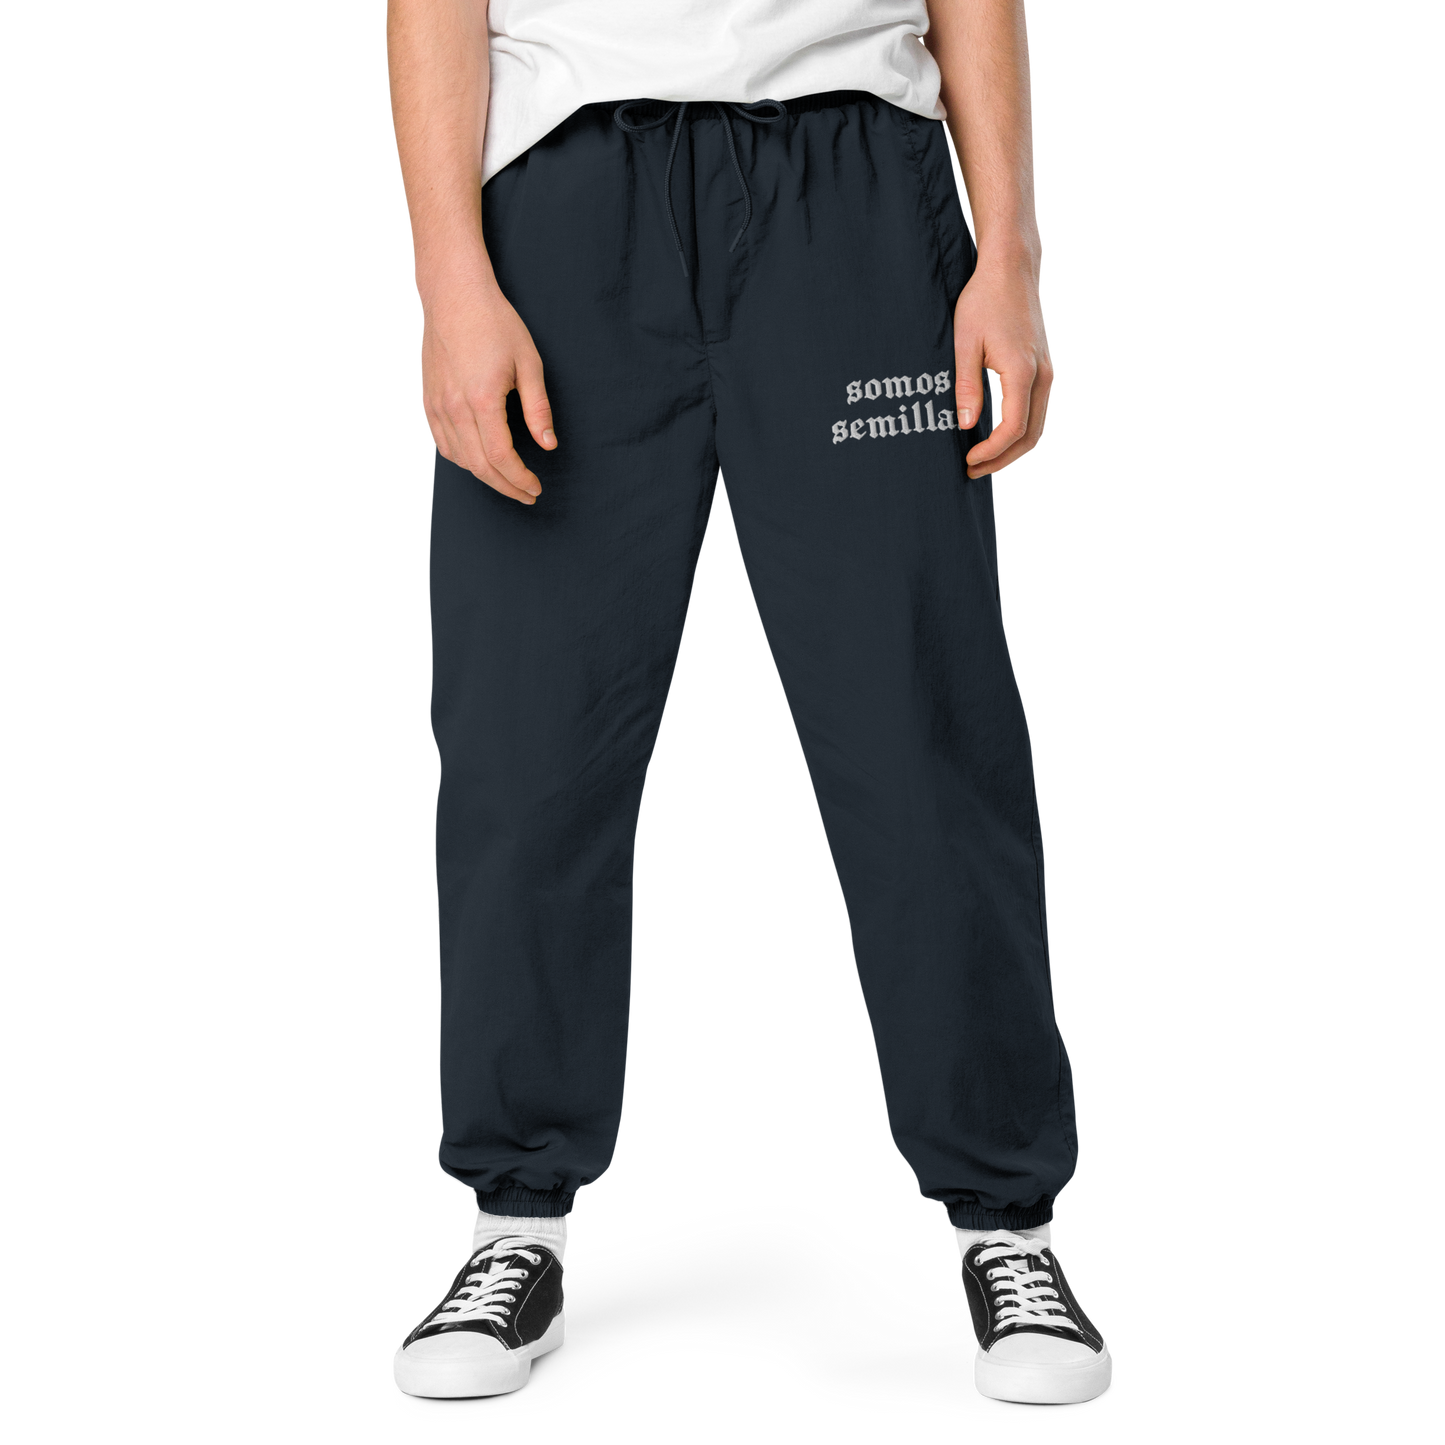 Somos Semillas - Embroidered Recycled Track Pants